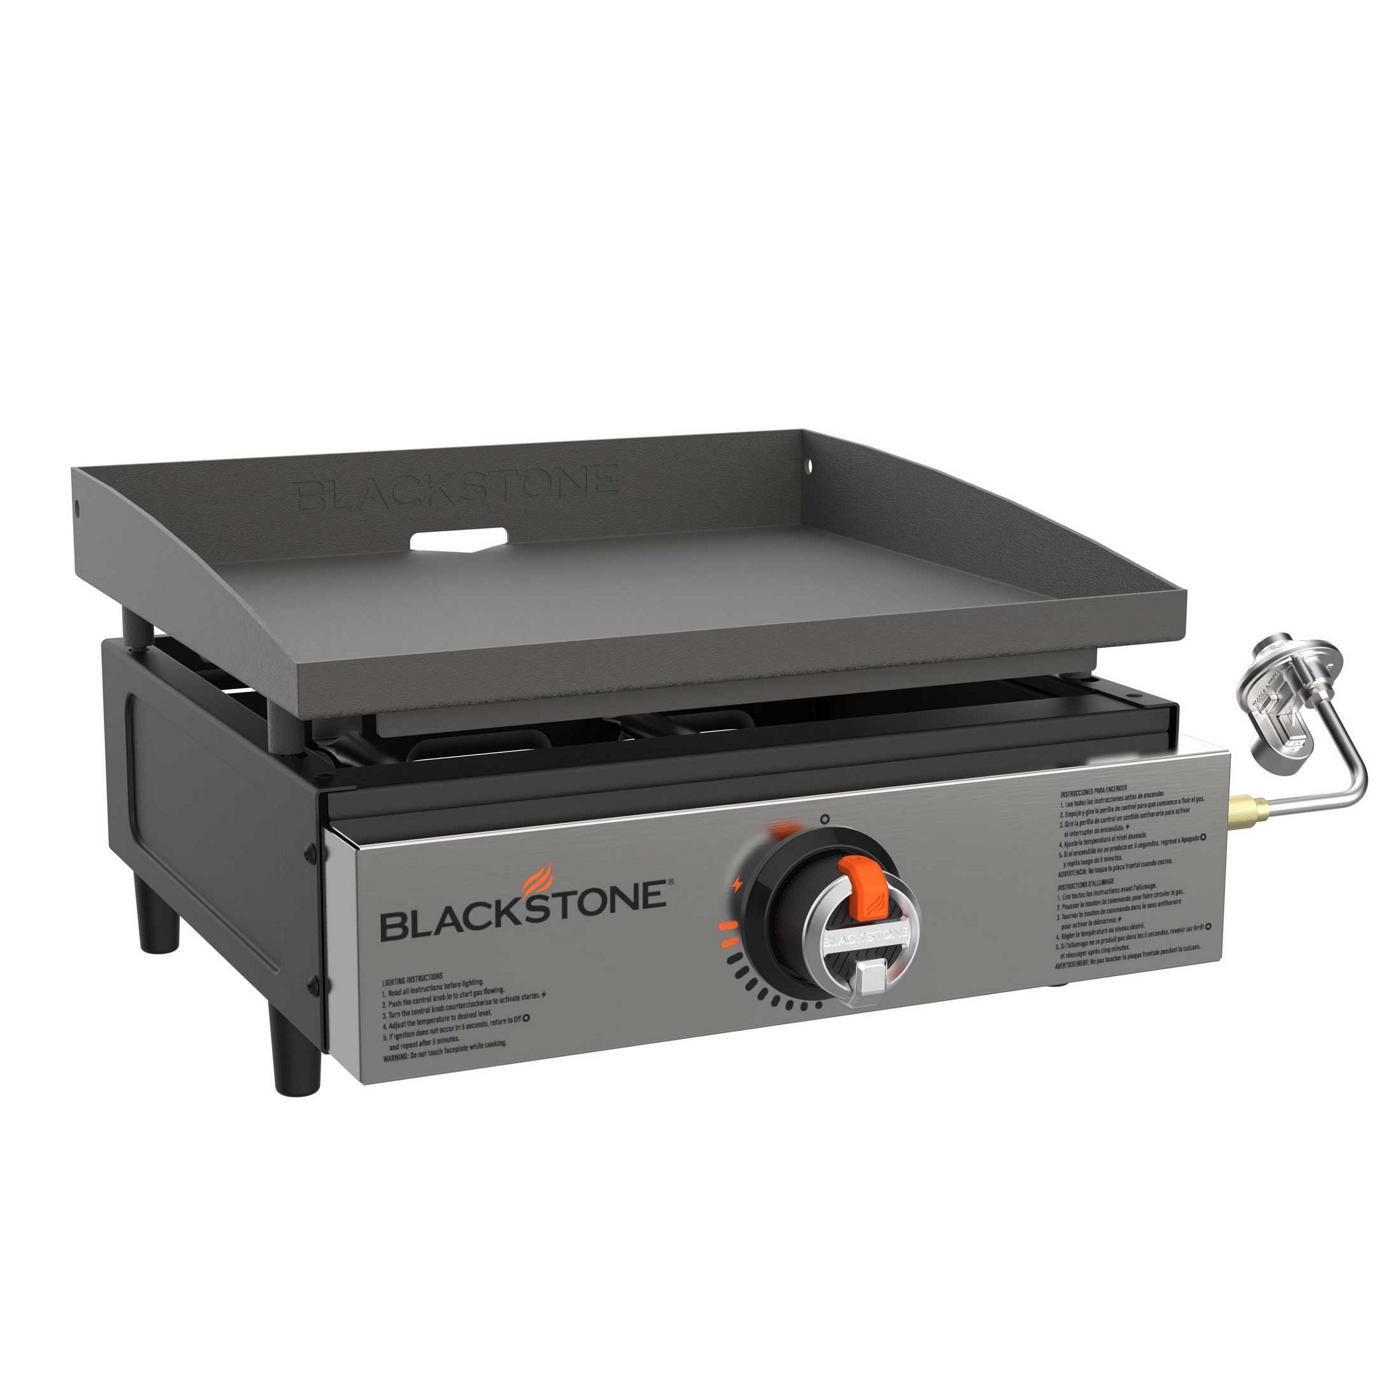 Blackstone Original Tabletop Stainless Griddle; image 1 of 7